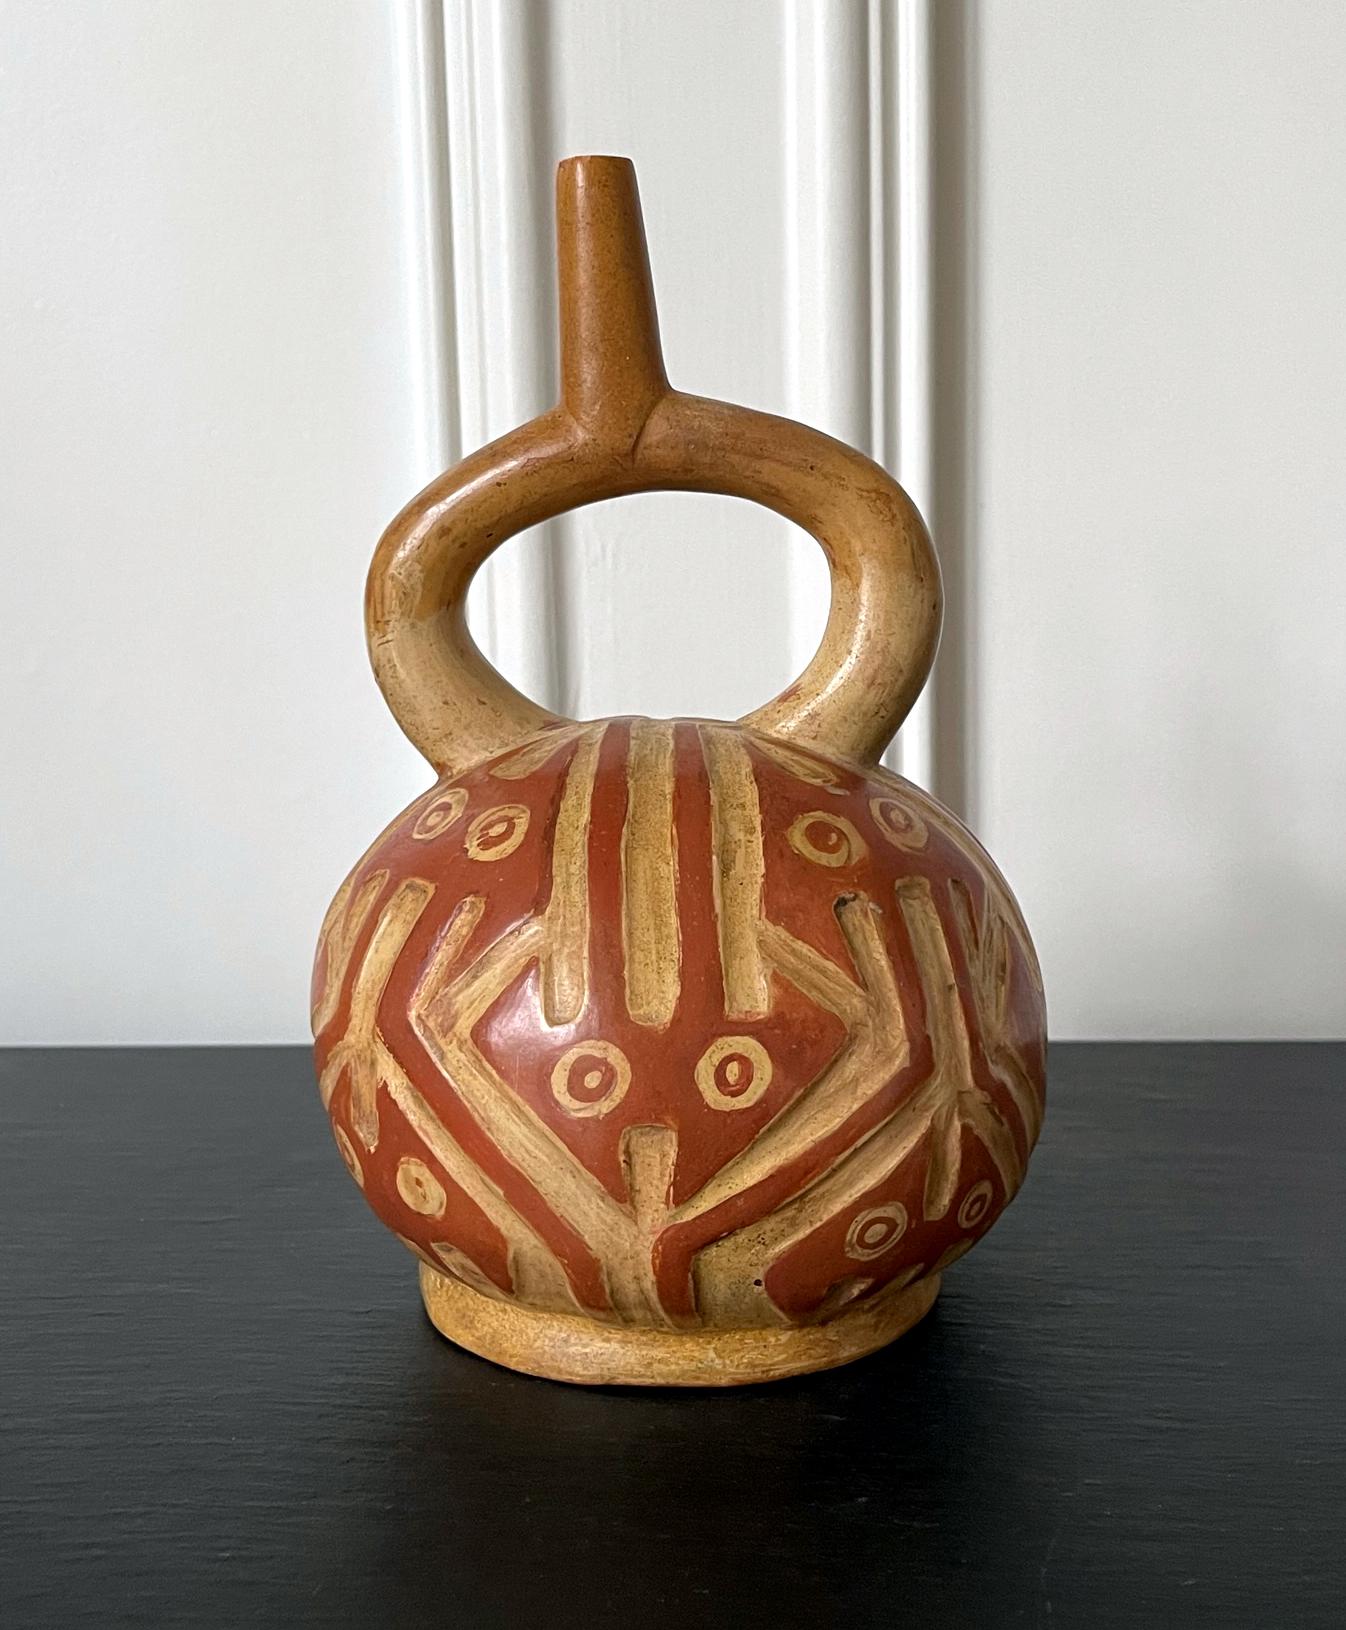 A ceramic stirrup vessel pot from late Moche culture circa 500-700AD in nowadays Northern Coast of Peru. 
The hollow vessel features a rounded body and a stirrup handle and sprout, supported by a short foot ring. The highly stylized surface is